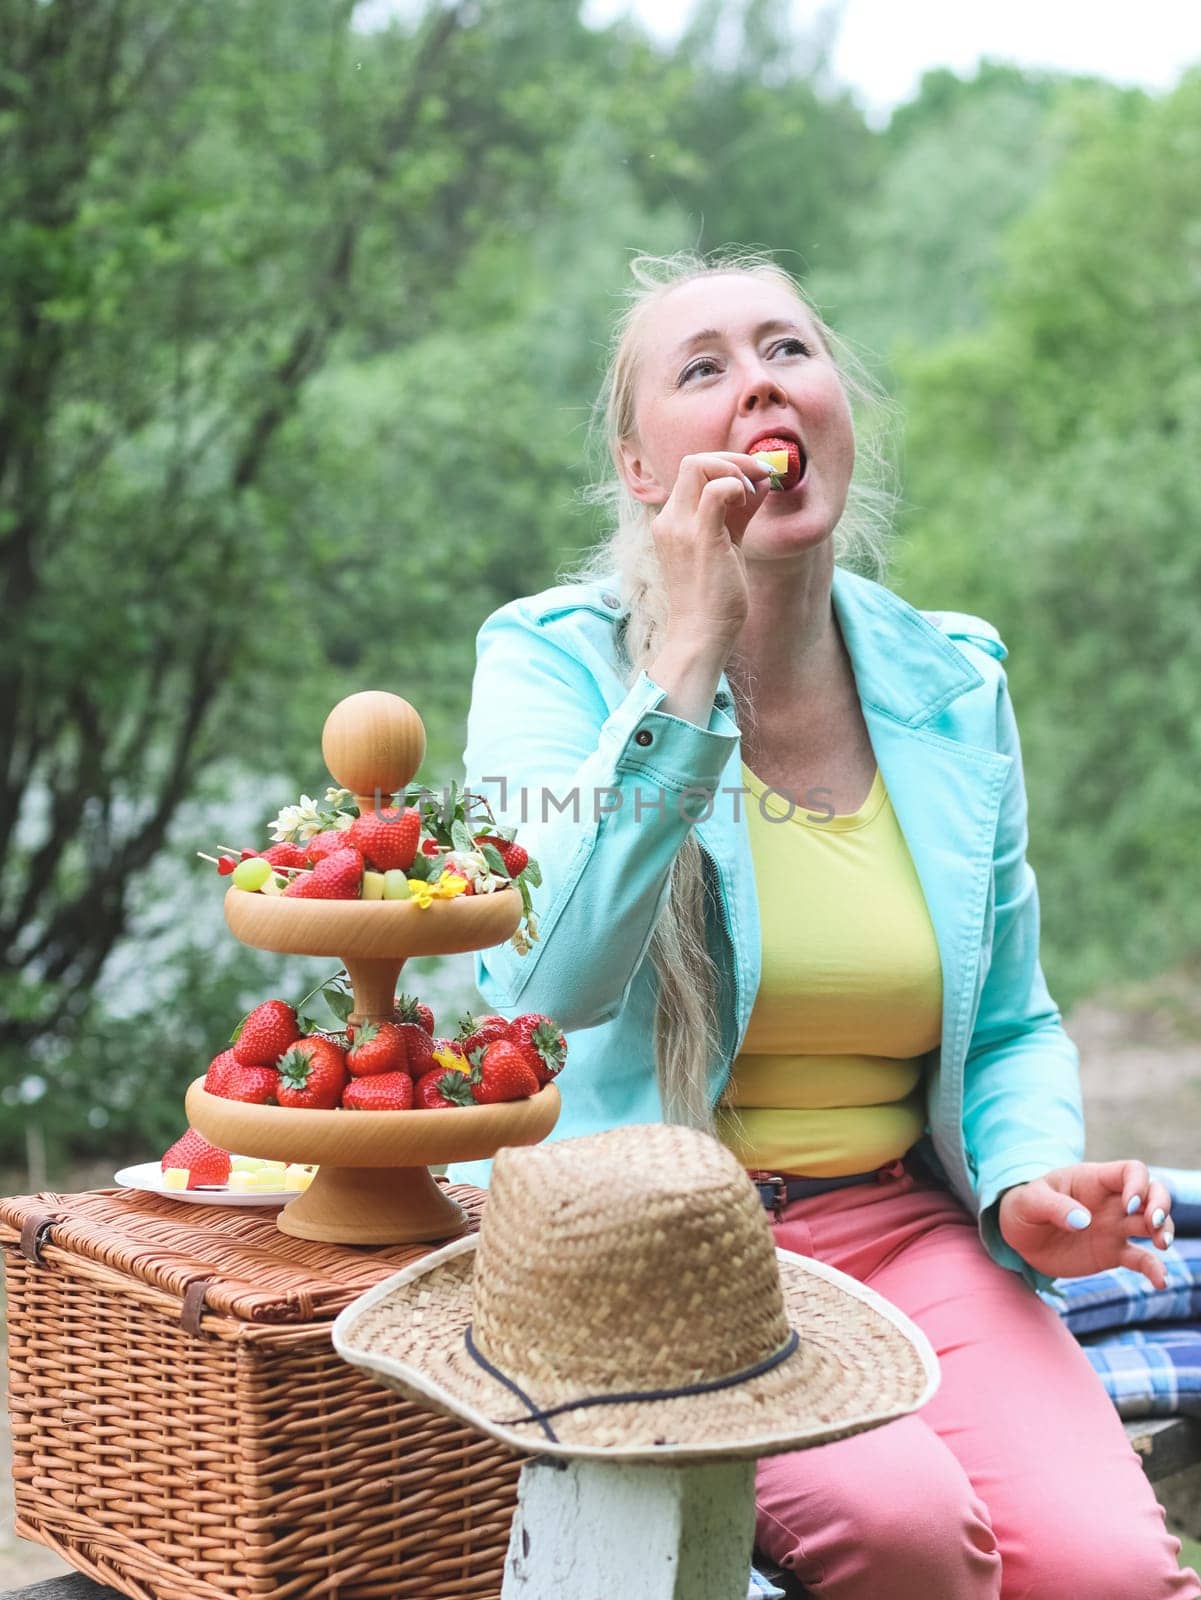 Portrait of a beautiful Caucasian cheerful middle-aged blonde woman sitting on a bench with a wicker basket, a wooden two-tier plate and eating a fruit barbecue on a skewer while sitting in a park on a spring day, close-up side view. Outdoor picnic concept, healthy eating and lifestyle.